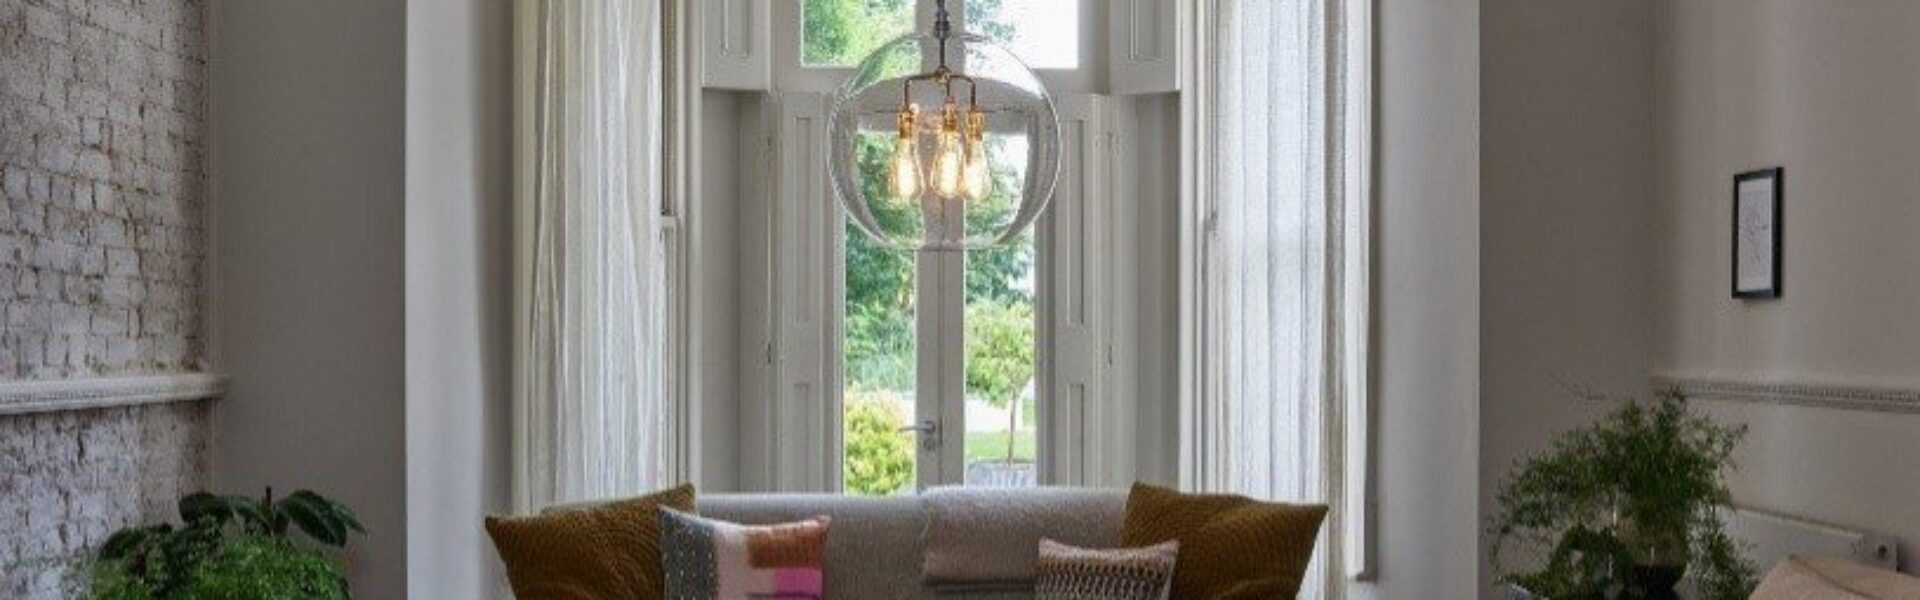 FIVE WAYS TO USE A PENDANT LIGHT THROUGHOUT YOUR HOUSE